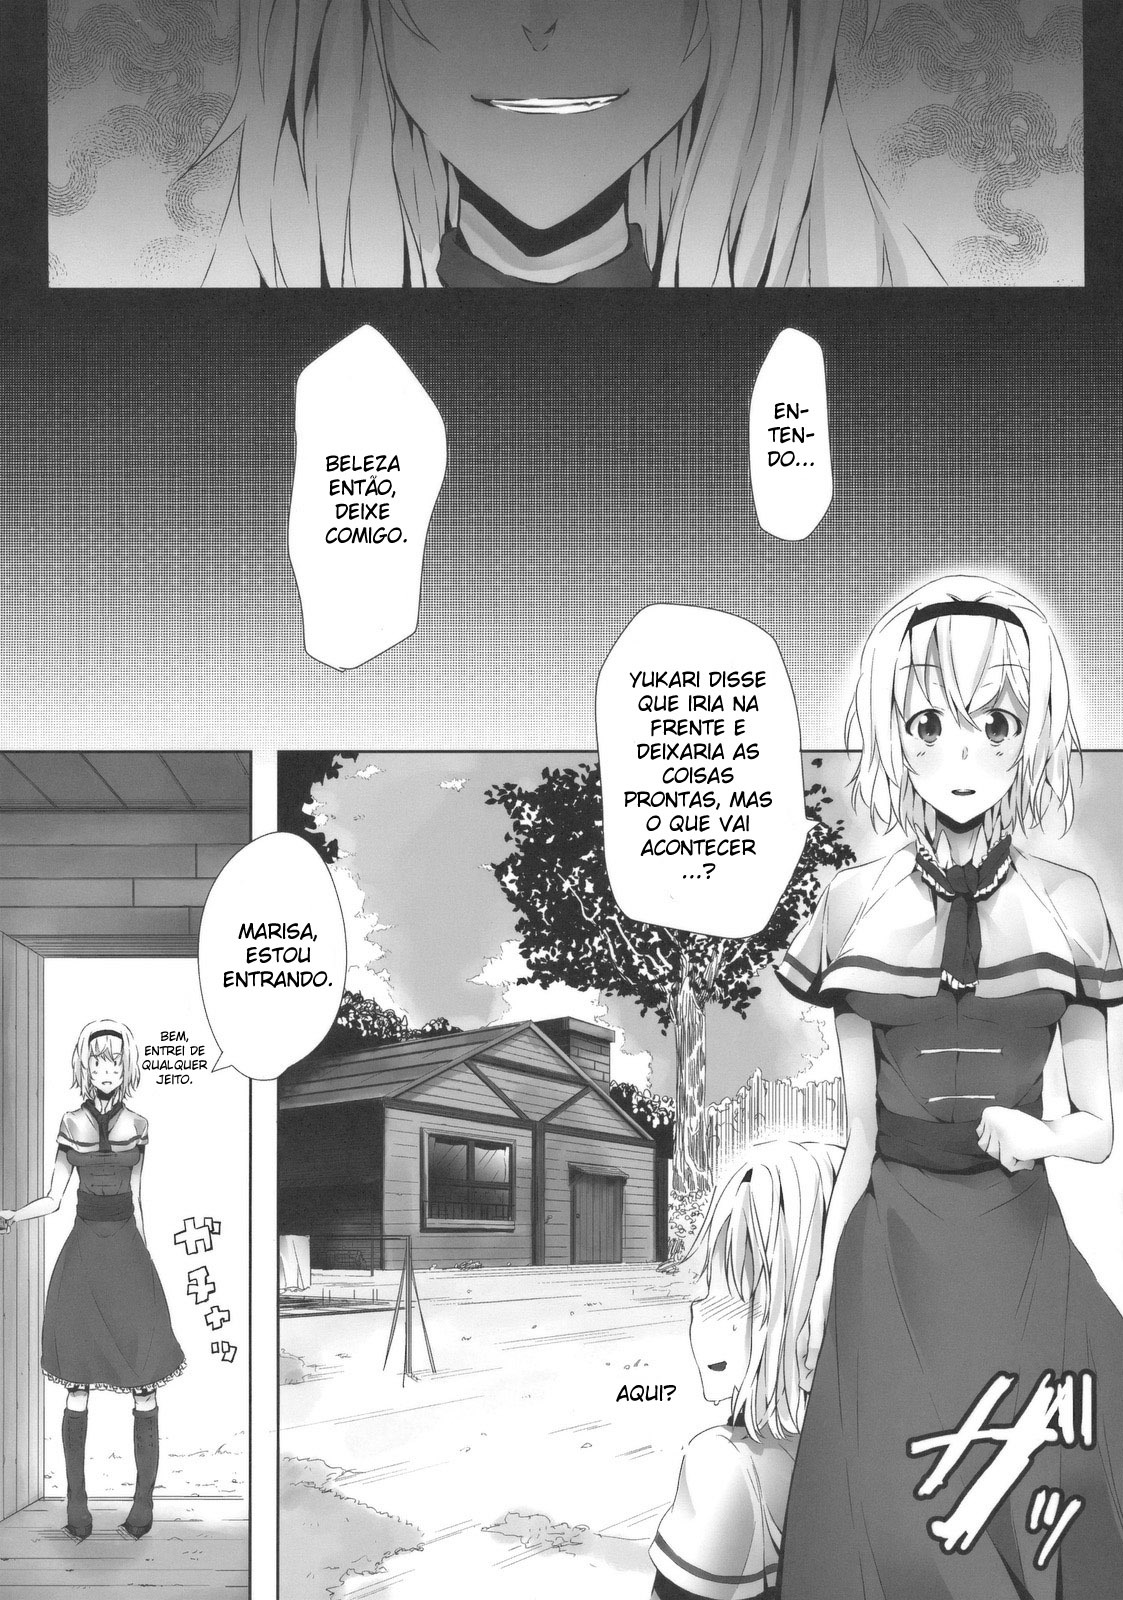 (C78) [Galley (ryoma)] Alice in Underland (Touhou Project) [Portuguese-BR] [Chrono Kimera H] page 4 full